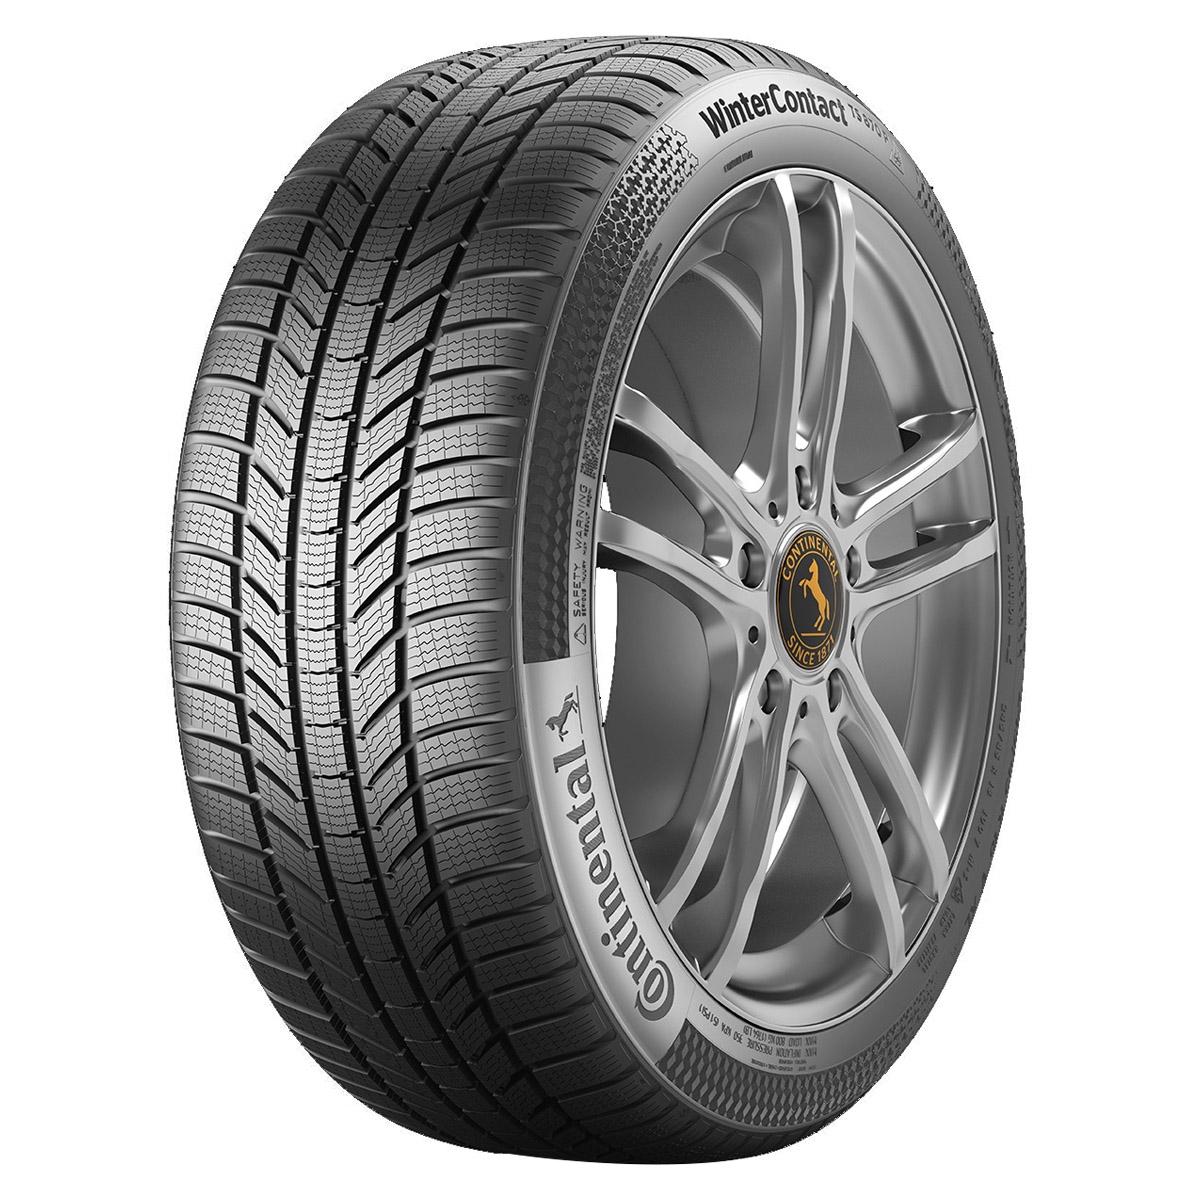 Anvelope iarna CONTINENTAL WINTER CONTACT TS870 P 215/50 R17 95H